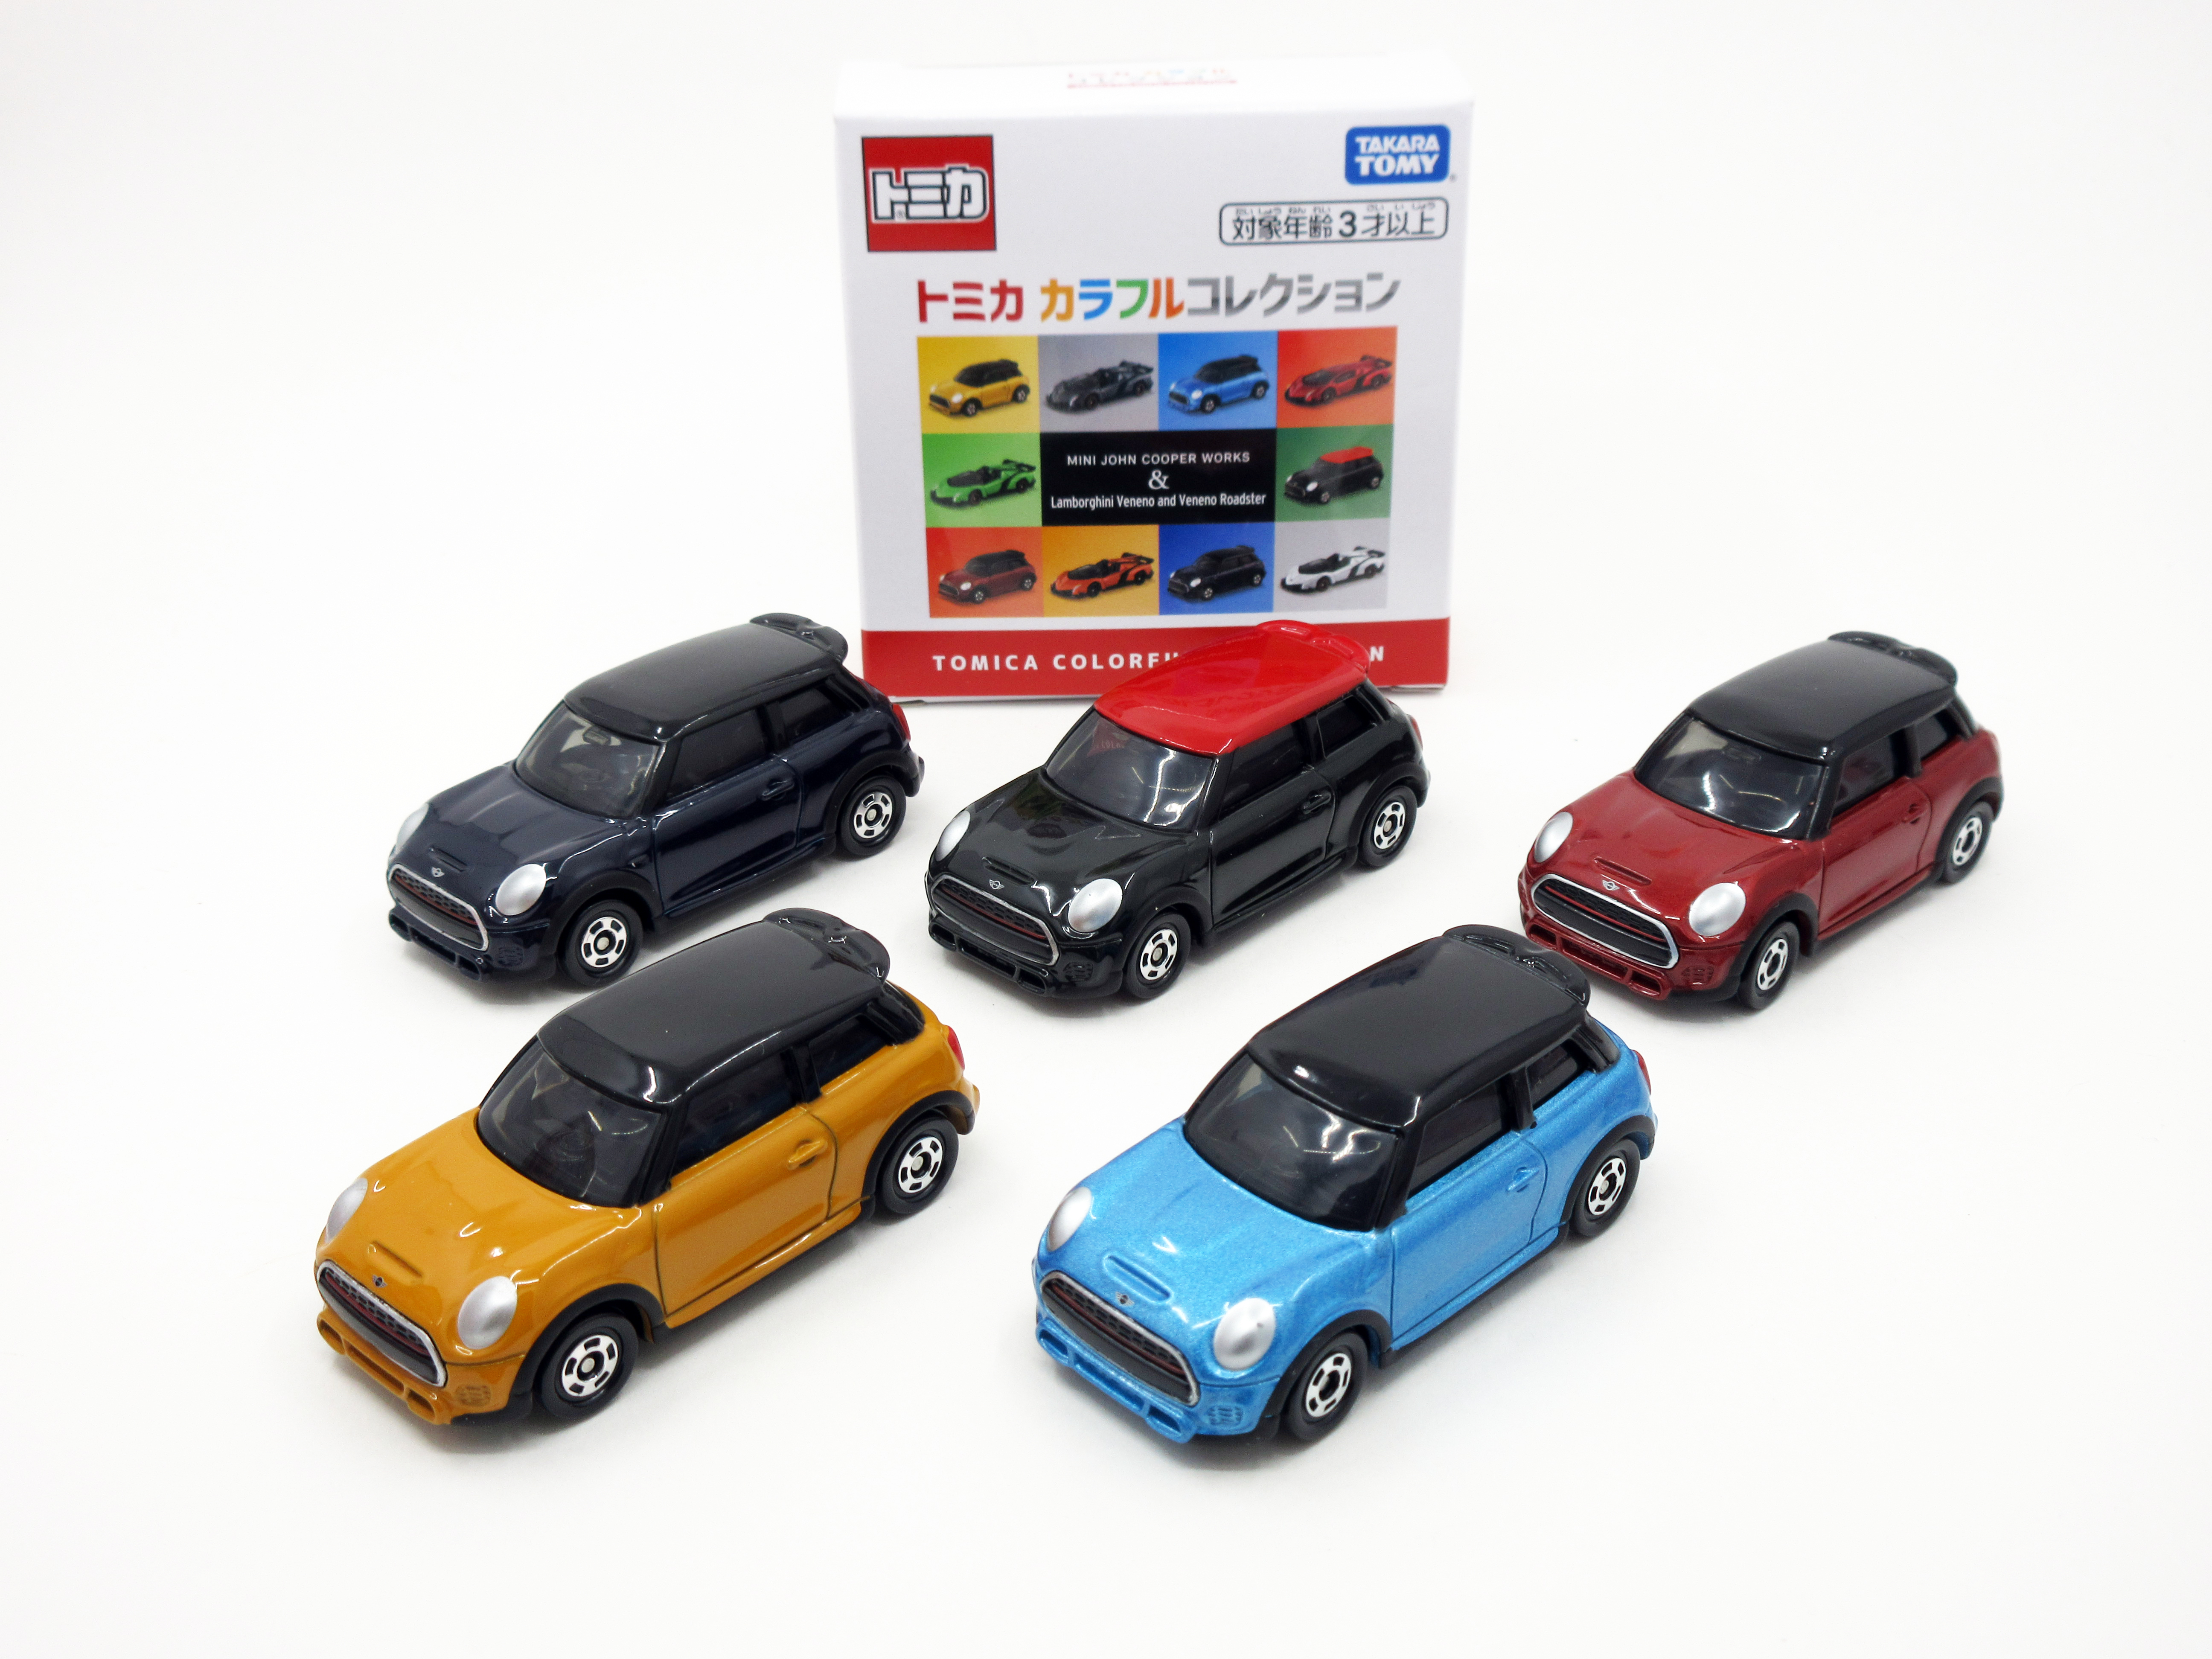 Tomica 7-11 Colorful Collection Mini John Cooper Works